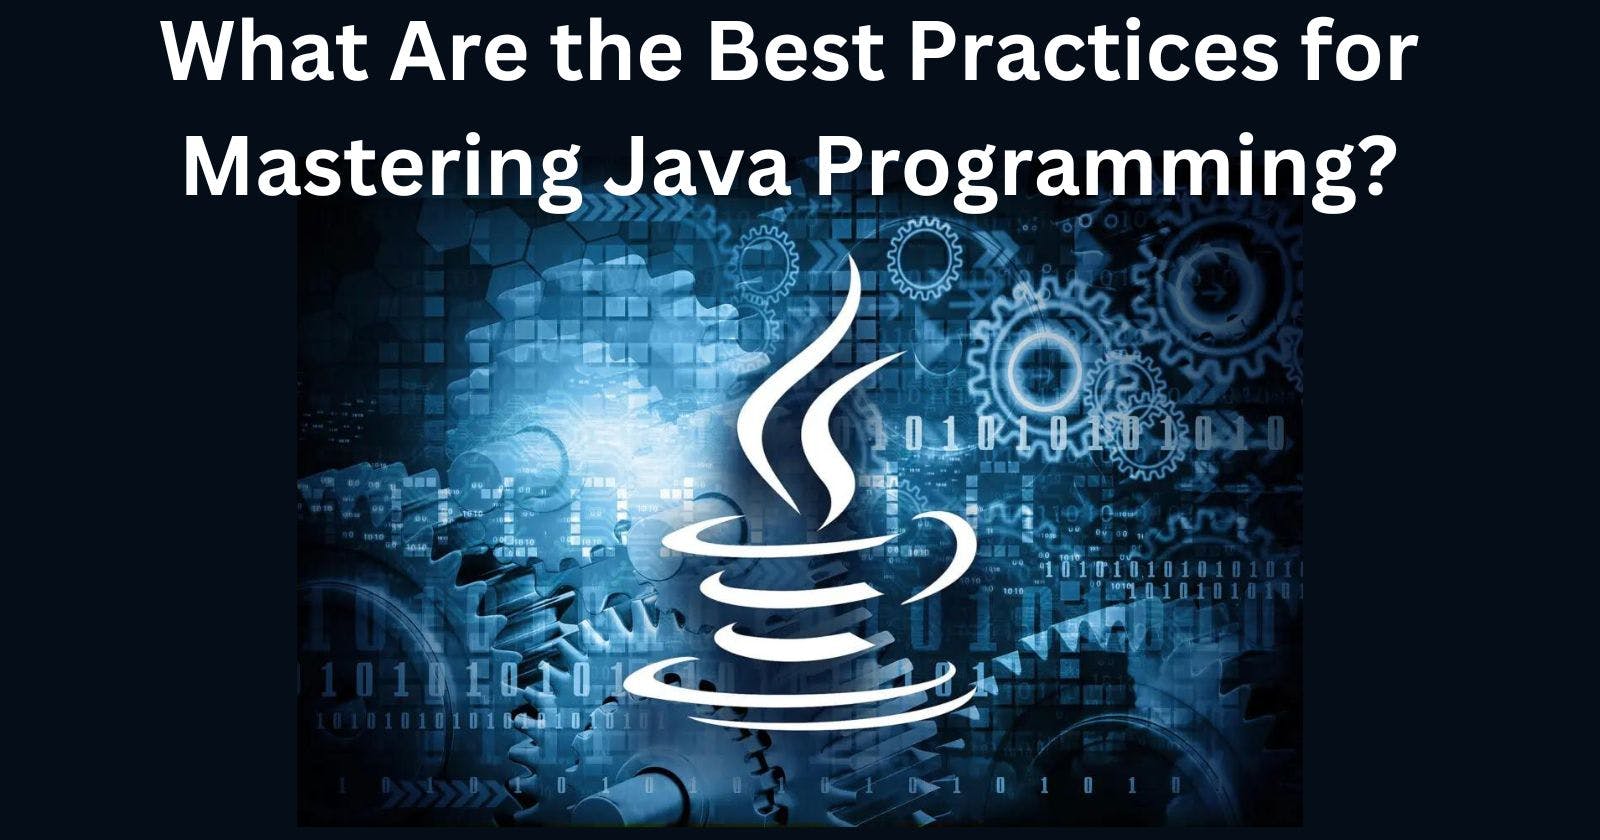 What Are the Best Practices for Mastering Java Programming?